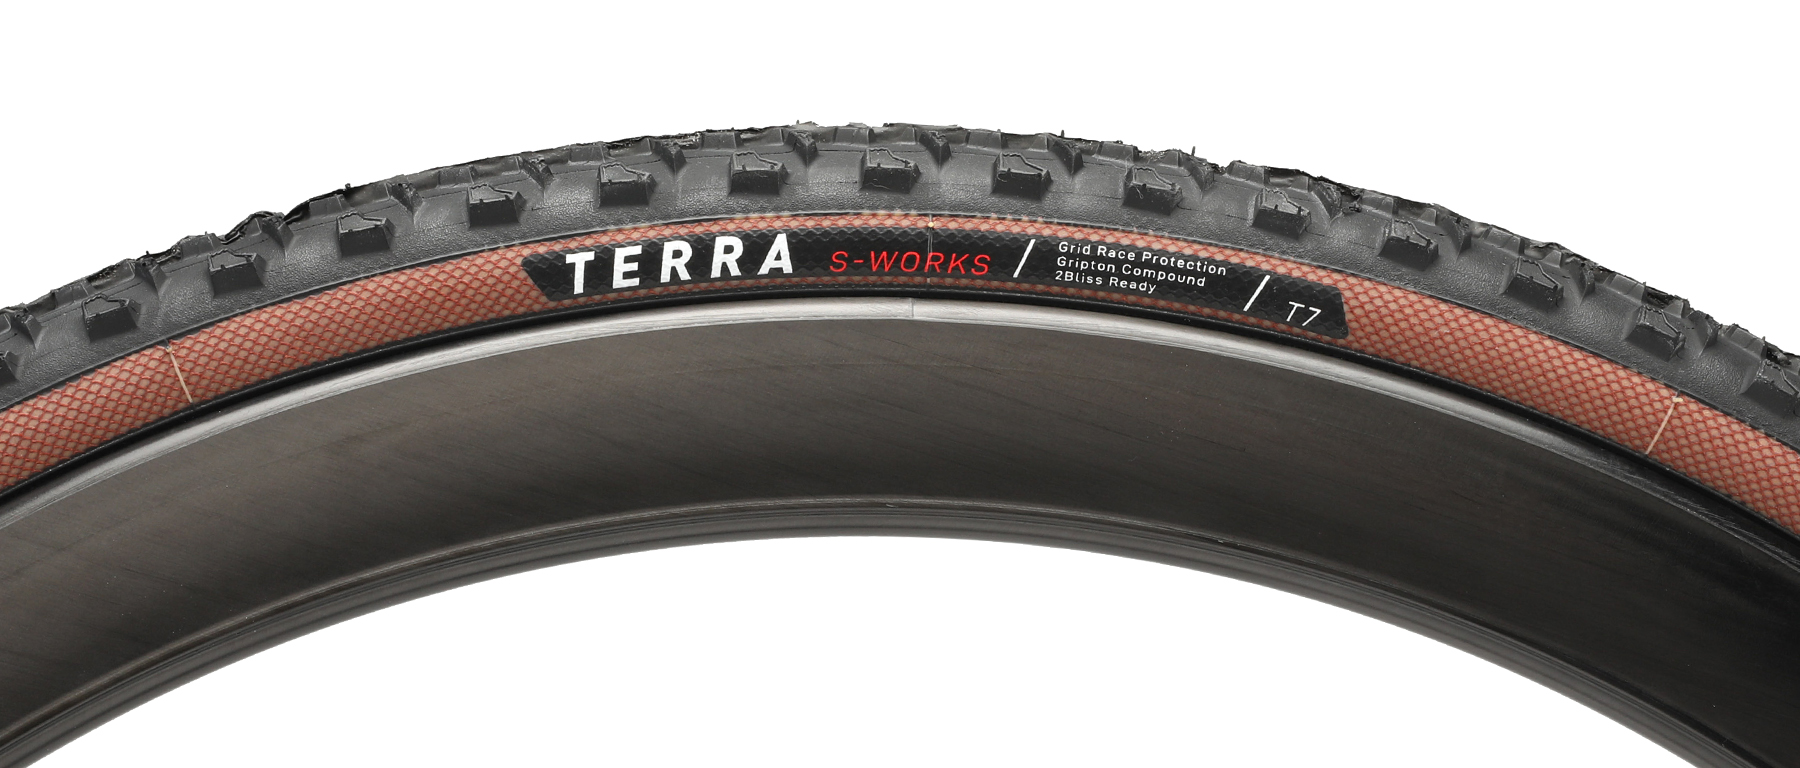 Specialized S-Works Terra 2Bliss Ready Tire